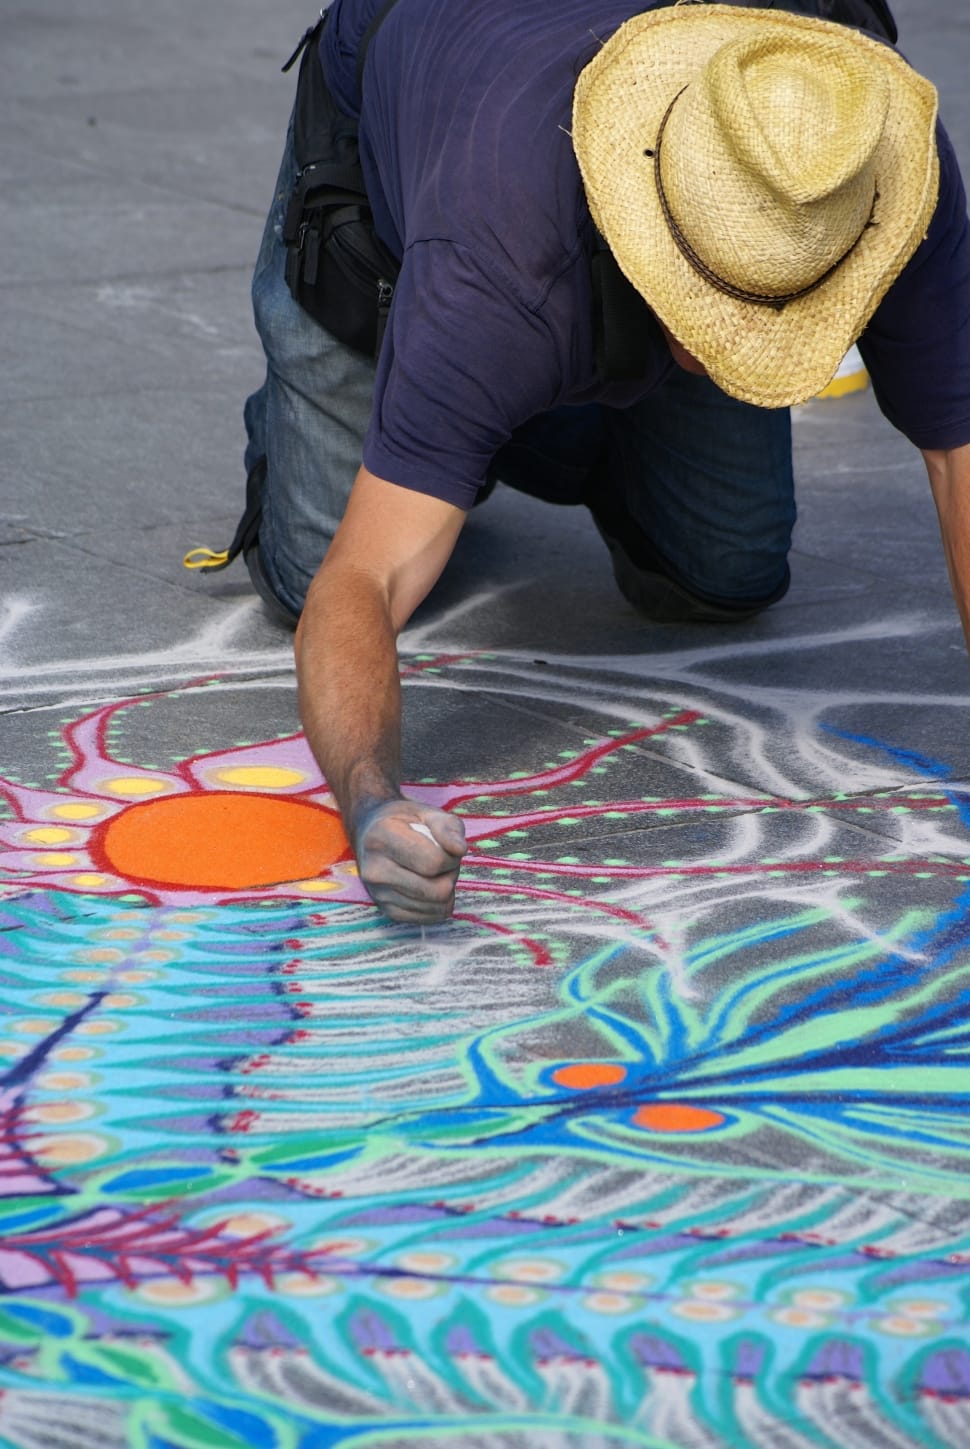 man in blue shirt making a floor art during daytime preview